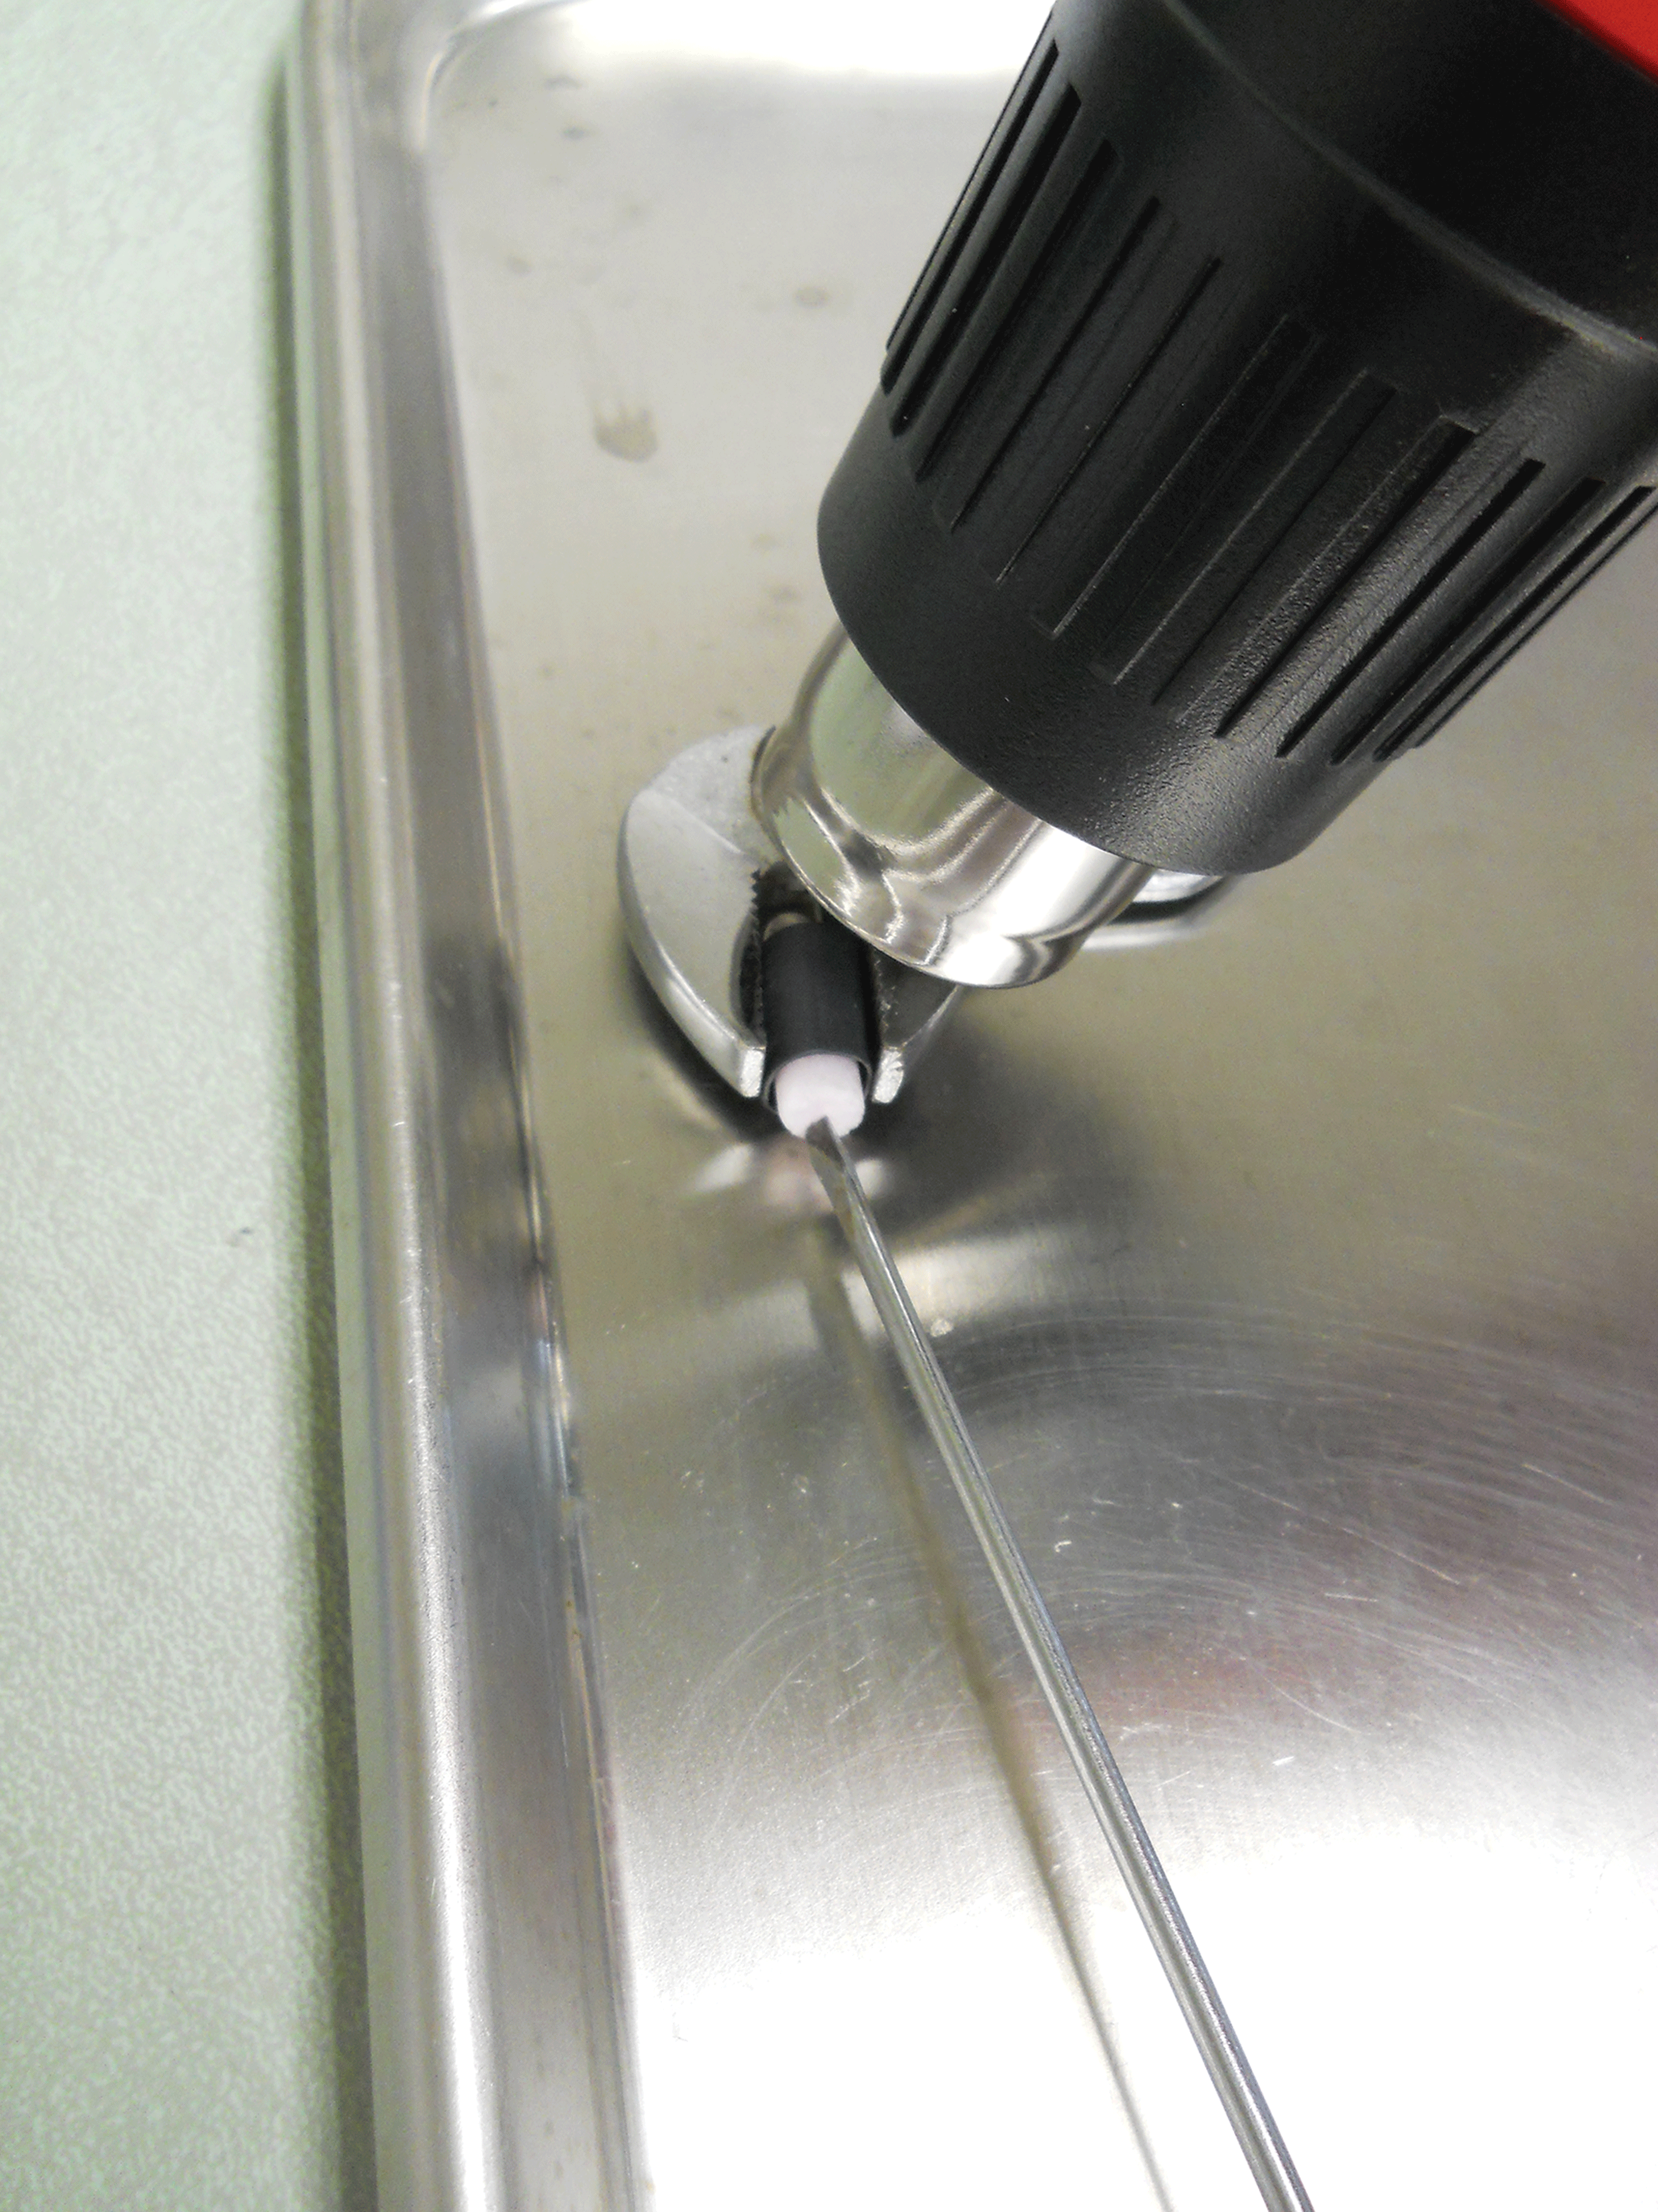 Photograph showing pliers being used to hold tag assembly while shrink tubing is heated.